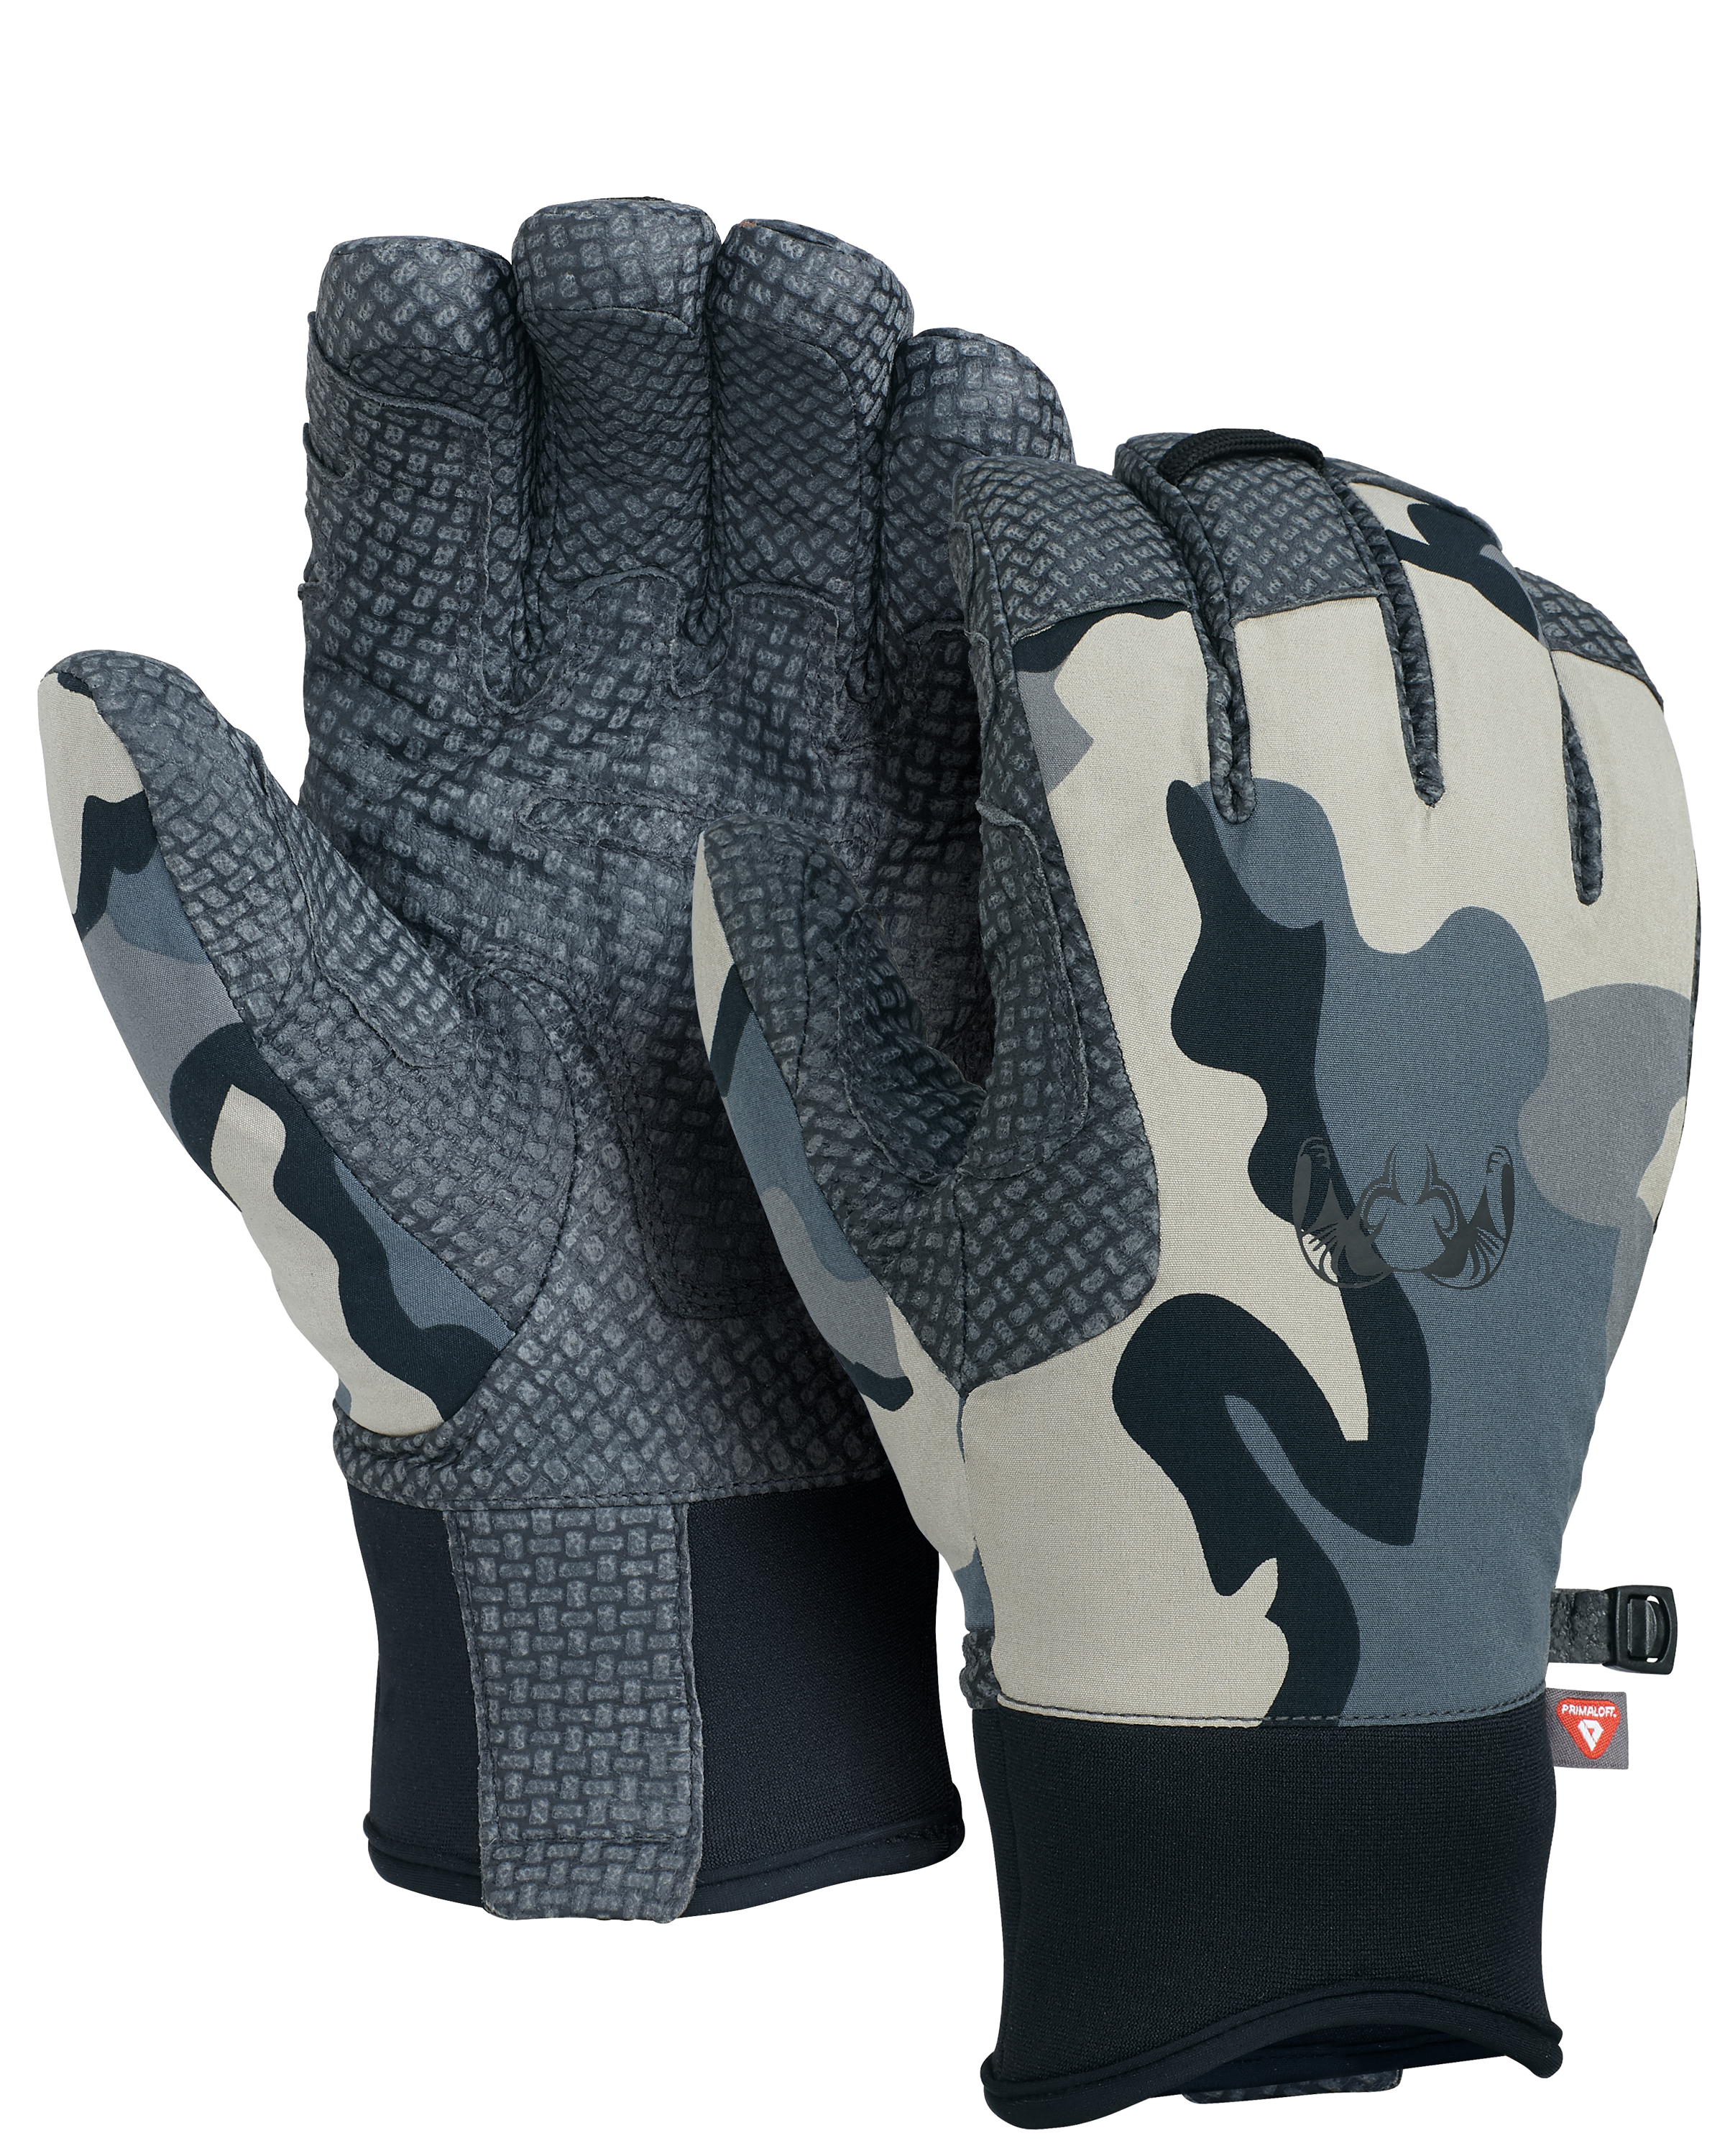 KUIU Expedition Hunting Glove in Vias | Size XL